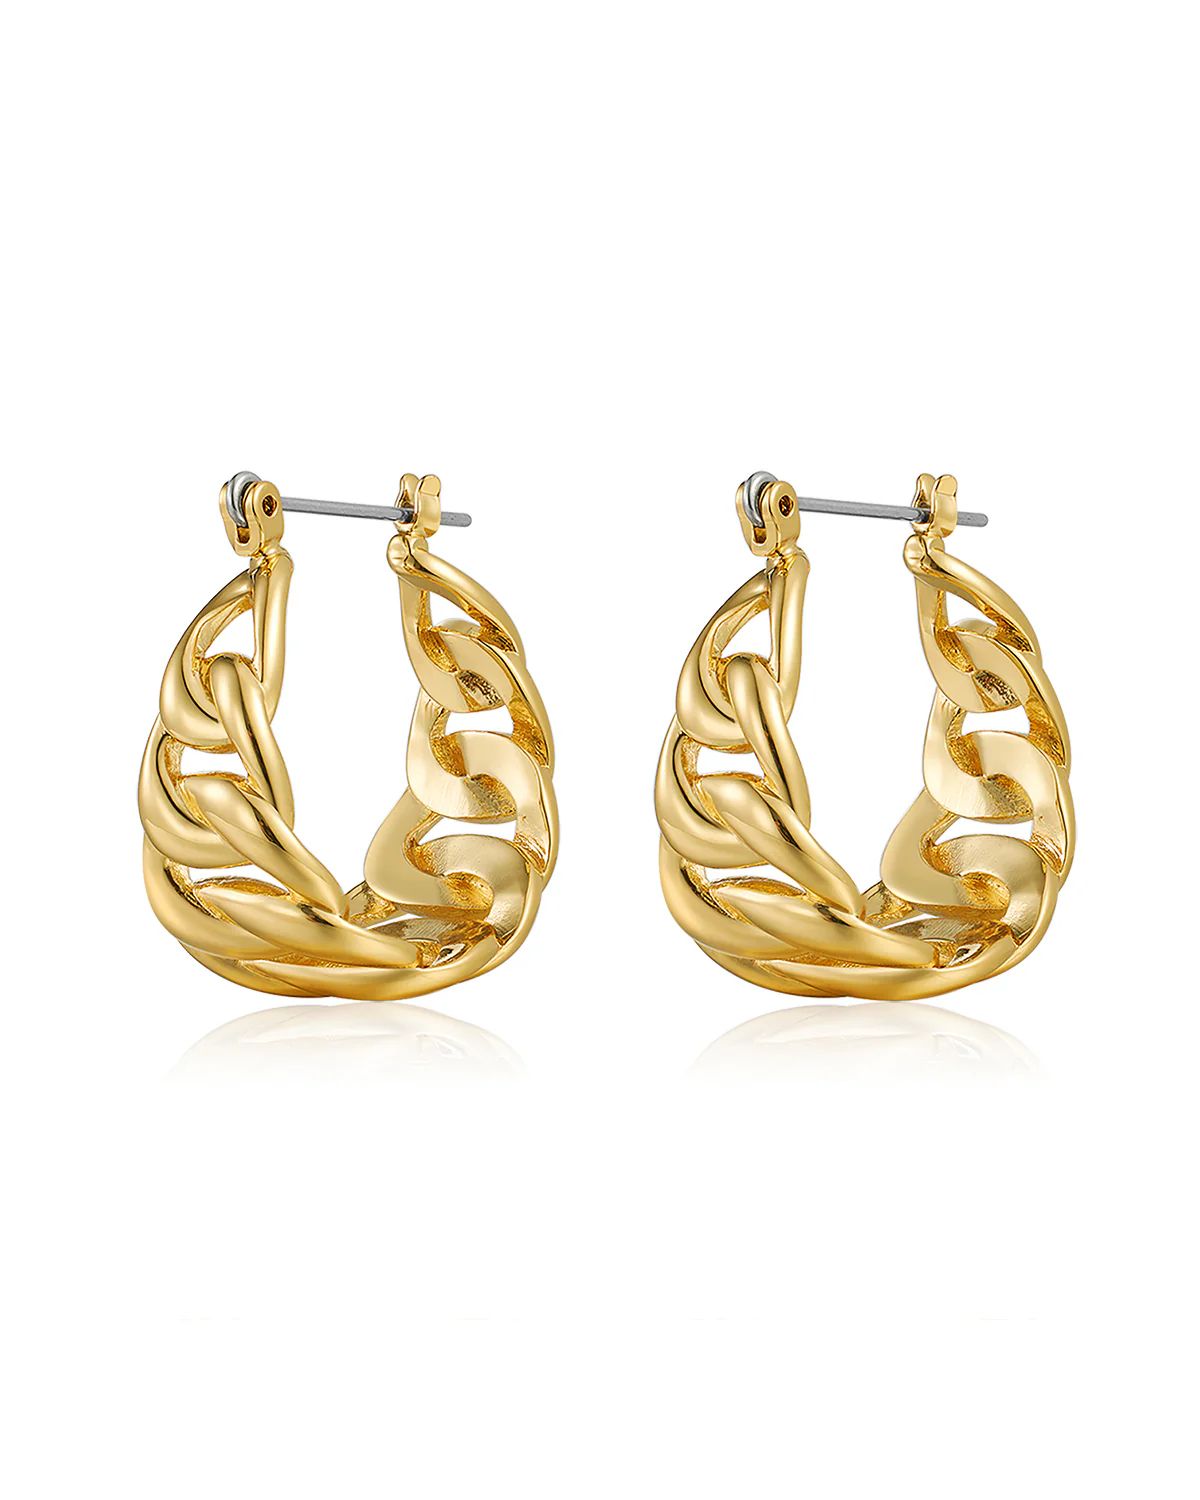 Luv AJ Louis Chain Hoops- Earring in Gold Lord & Taylor | Lord & Taylor